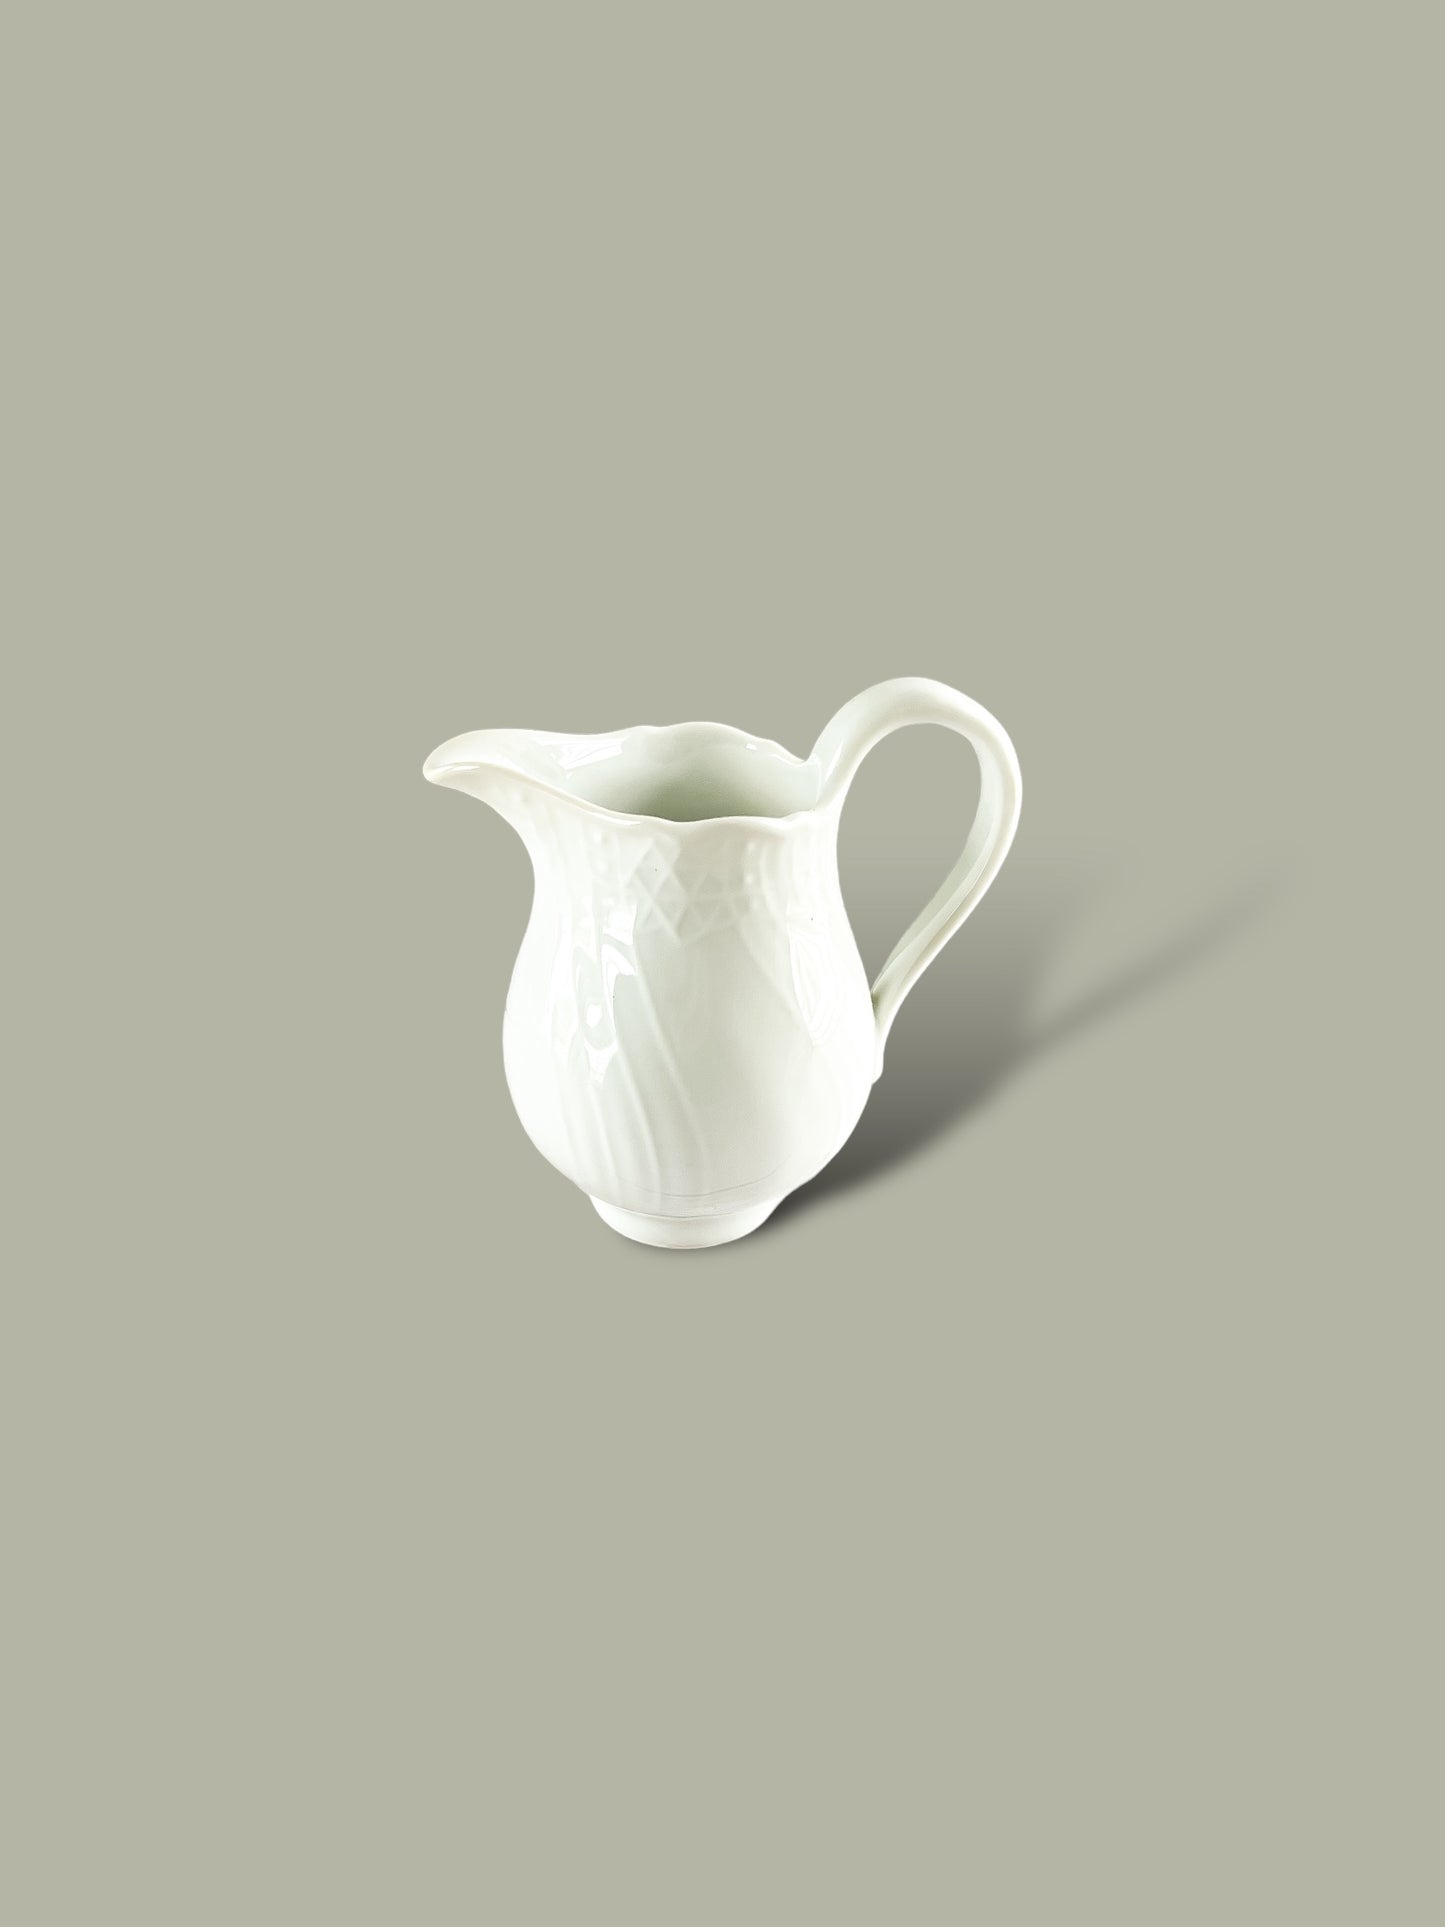 Hutschenreuther “Tea for Two” Set - ‘Dresden’ Collection in All White